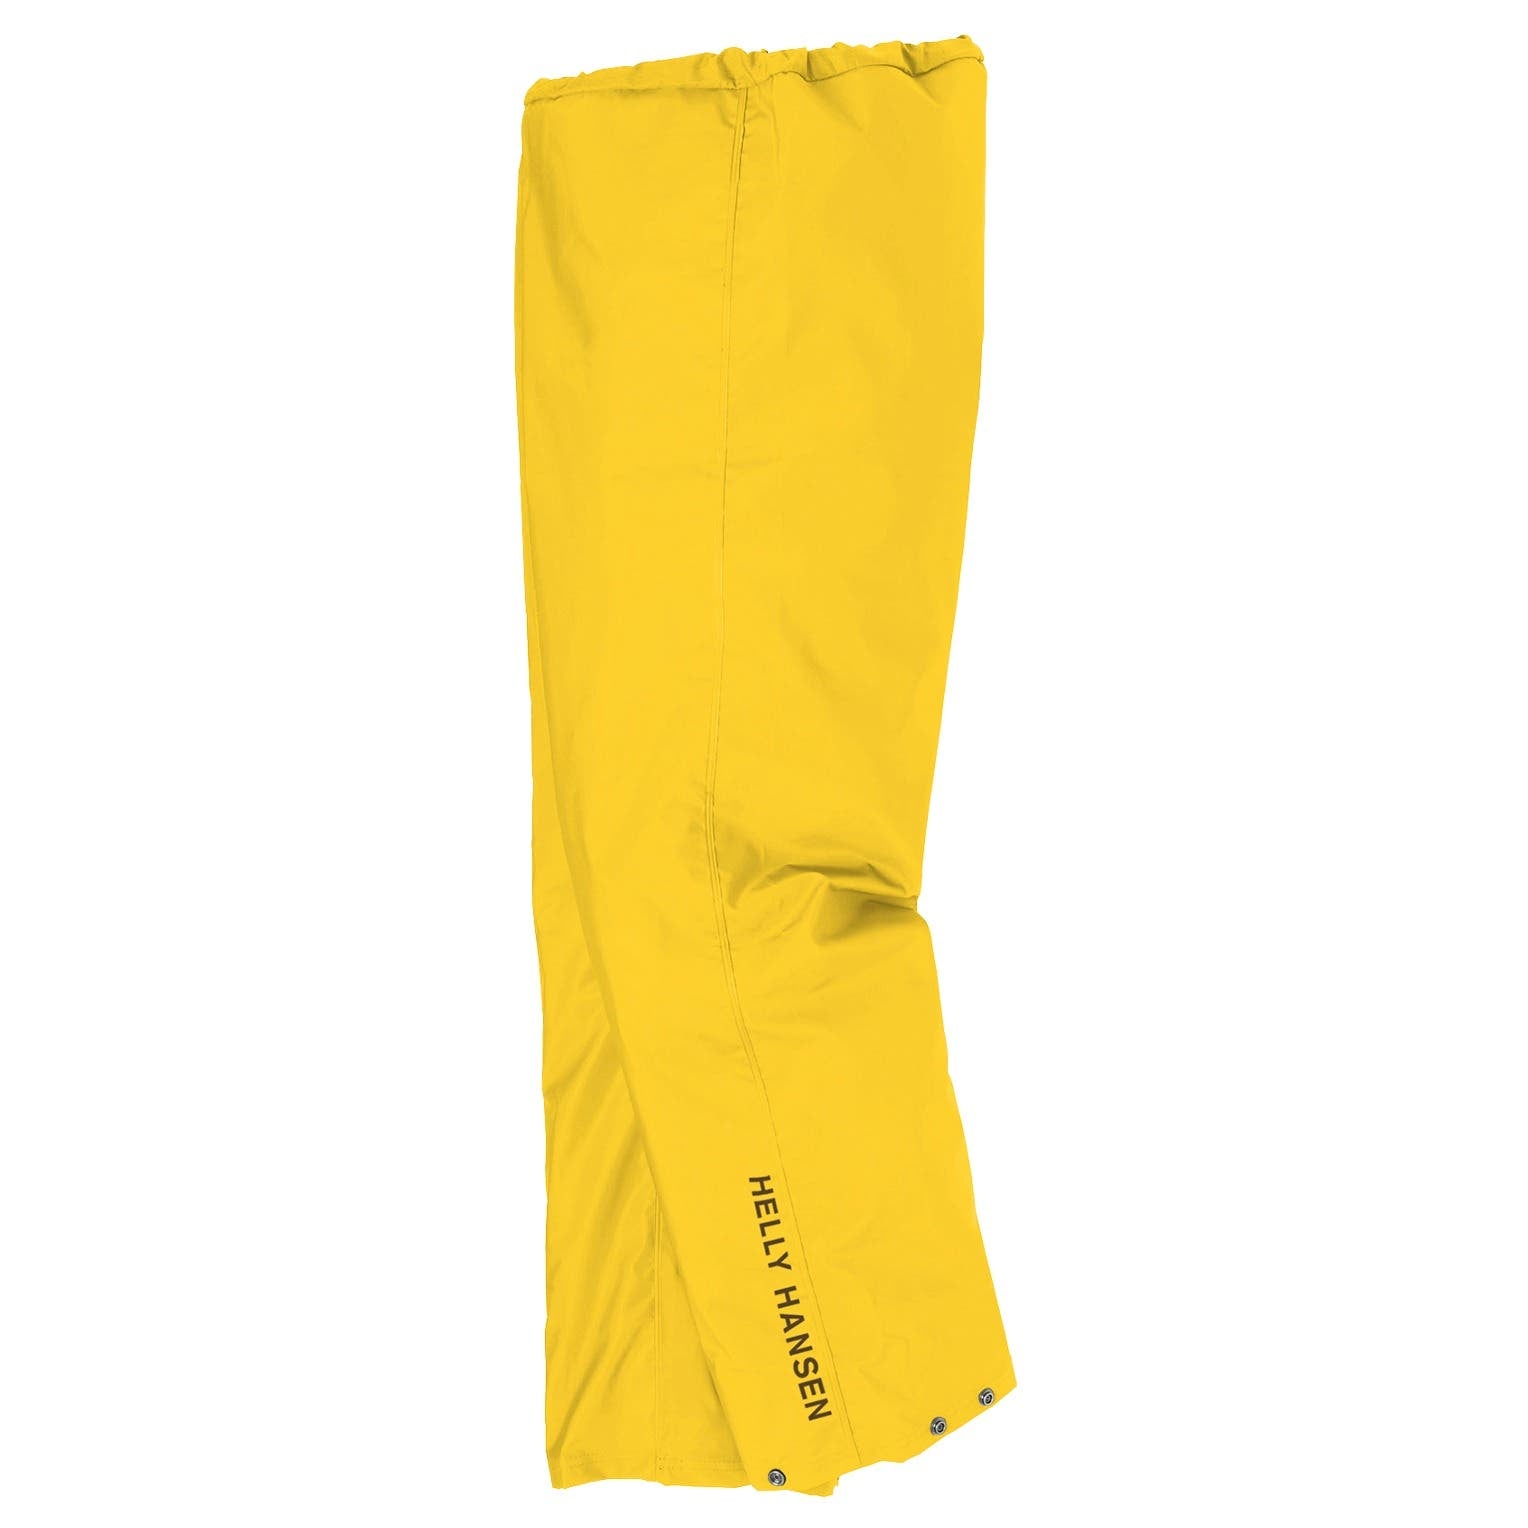 Helly Hansen Men's Mandal Rain Pant in Light Yellow from the side